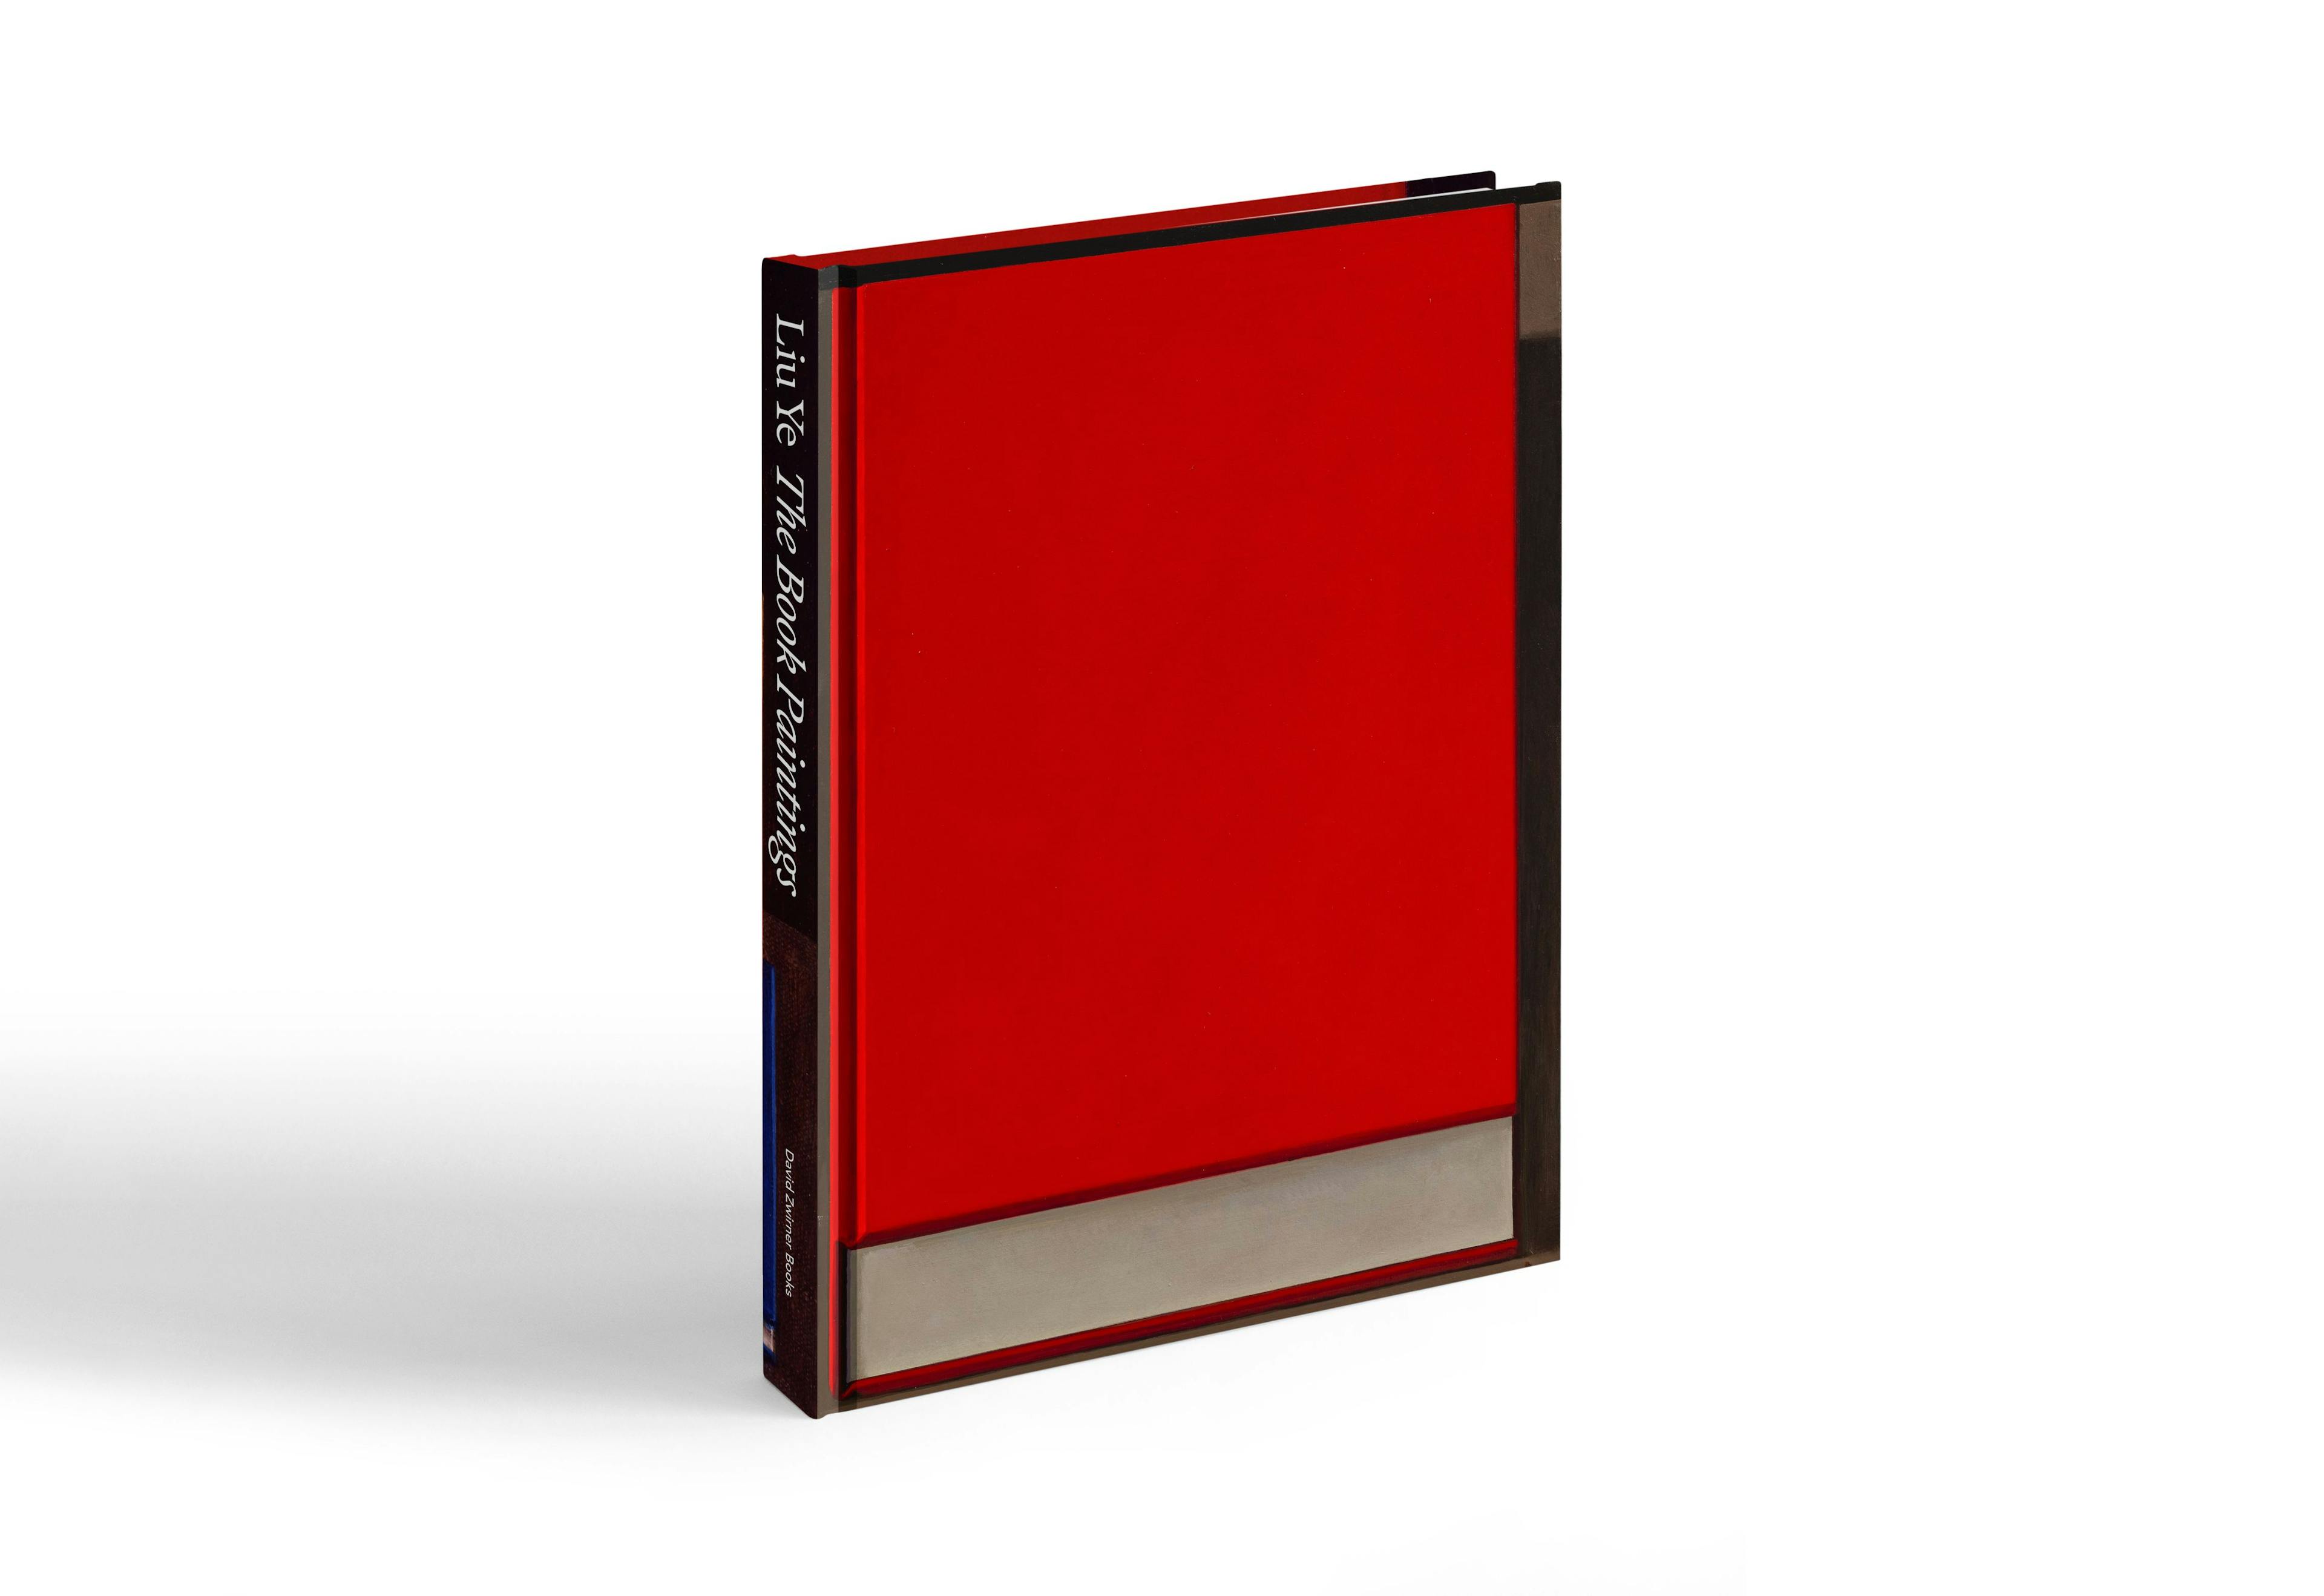 Cover of a book titled Liu Ye: The Book Paintings, published by David Zwirner Books in 2021.